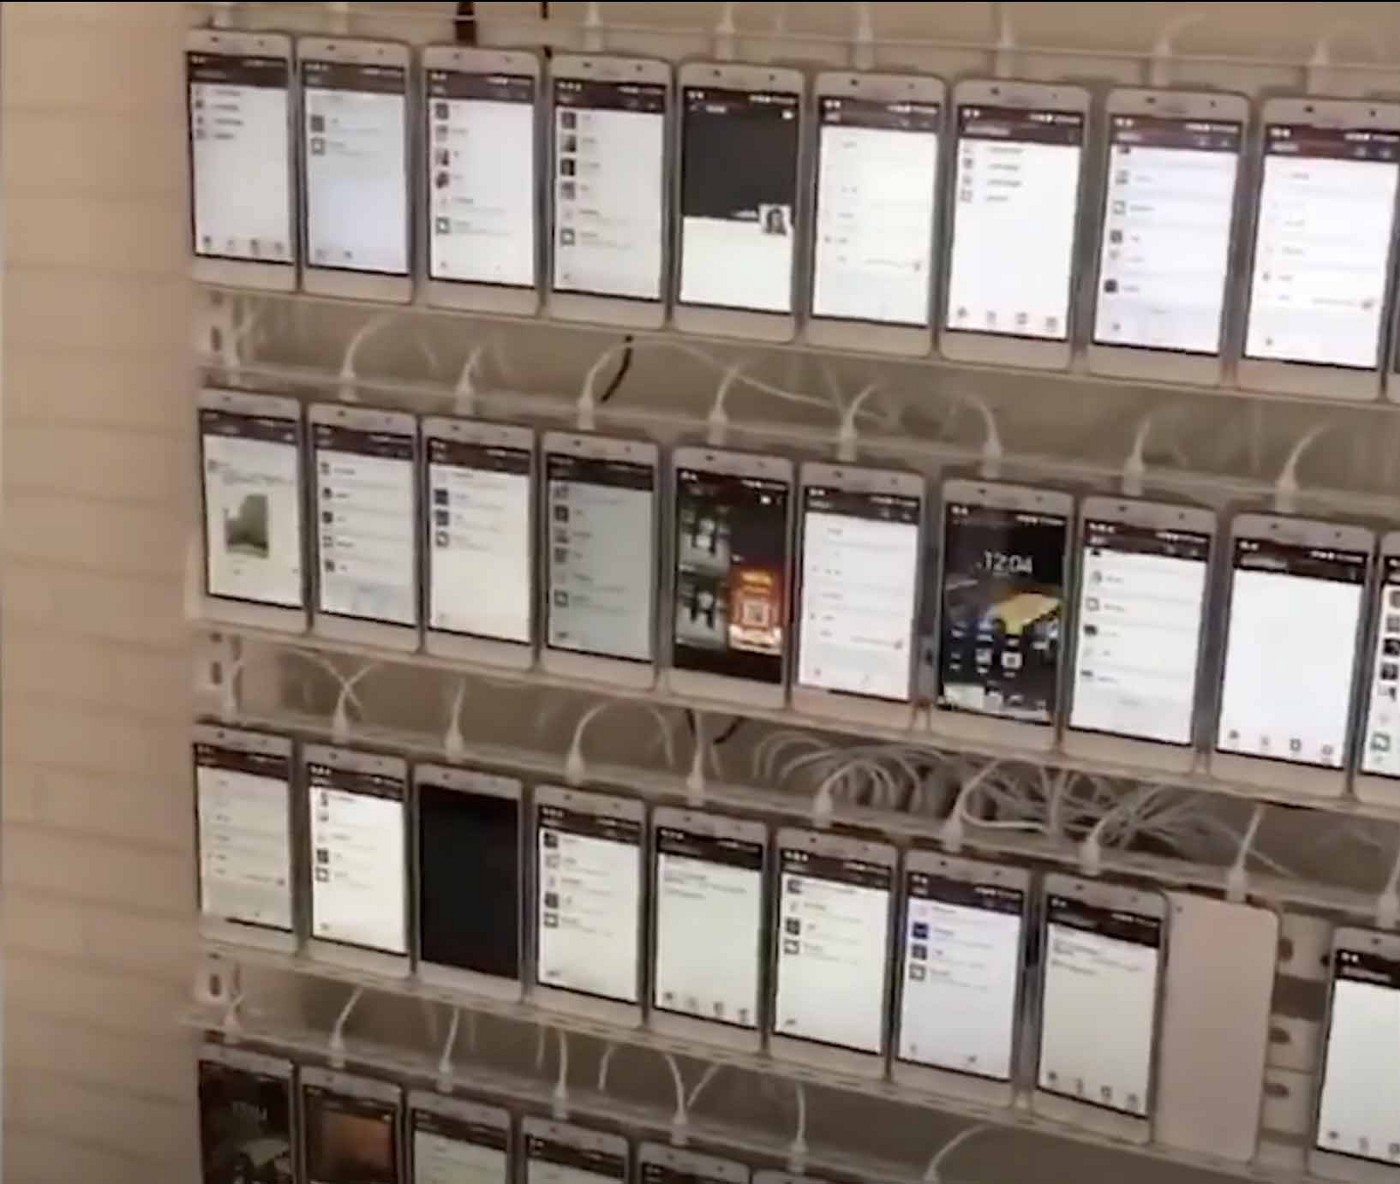 A wall of more than 10,000 phones used for abuse, part of a Chinese bot operation.